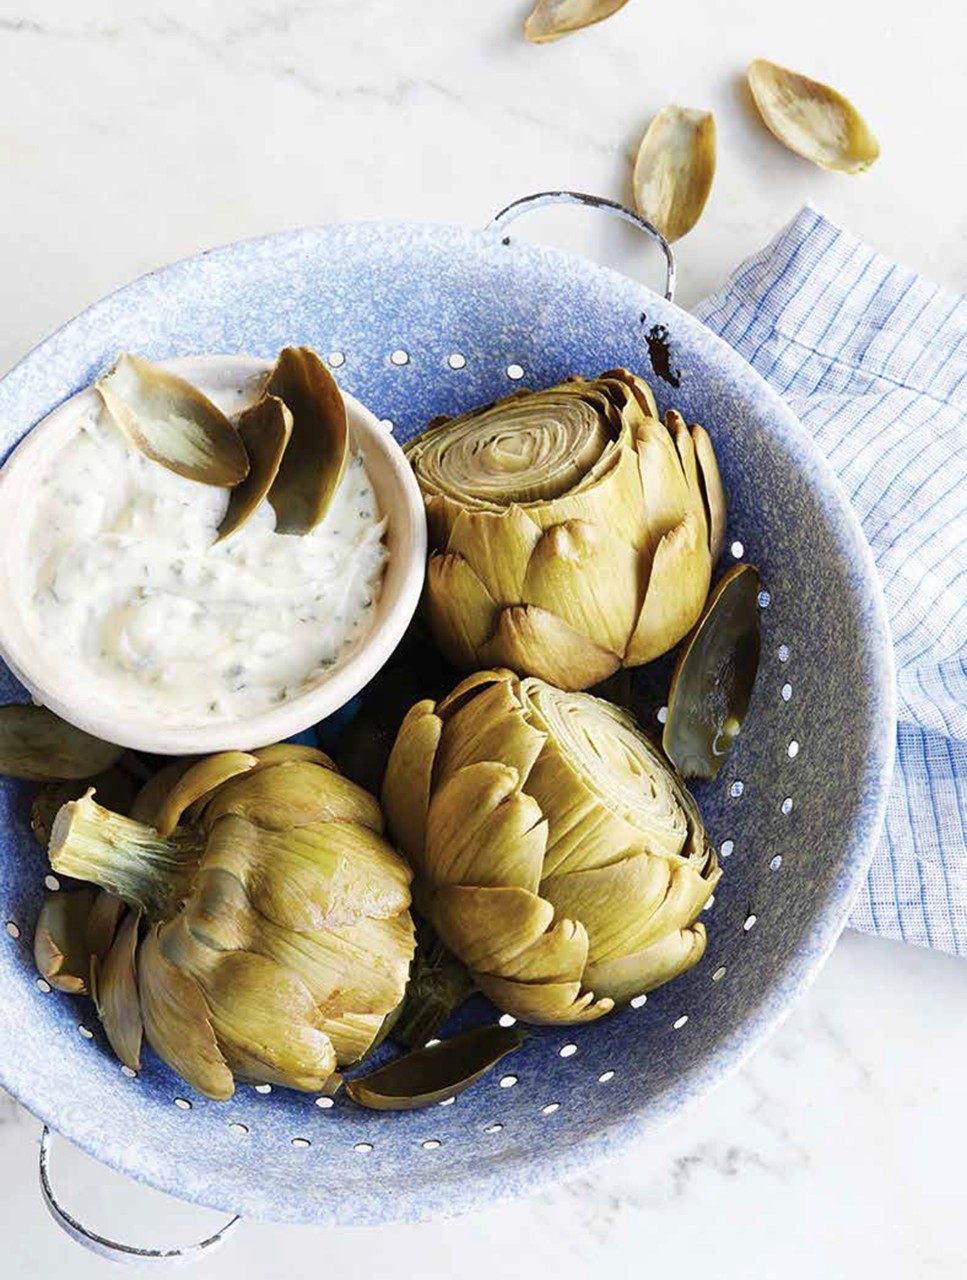 Steamed Artichokes with Herbed Goat Cheese Dip